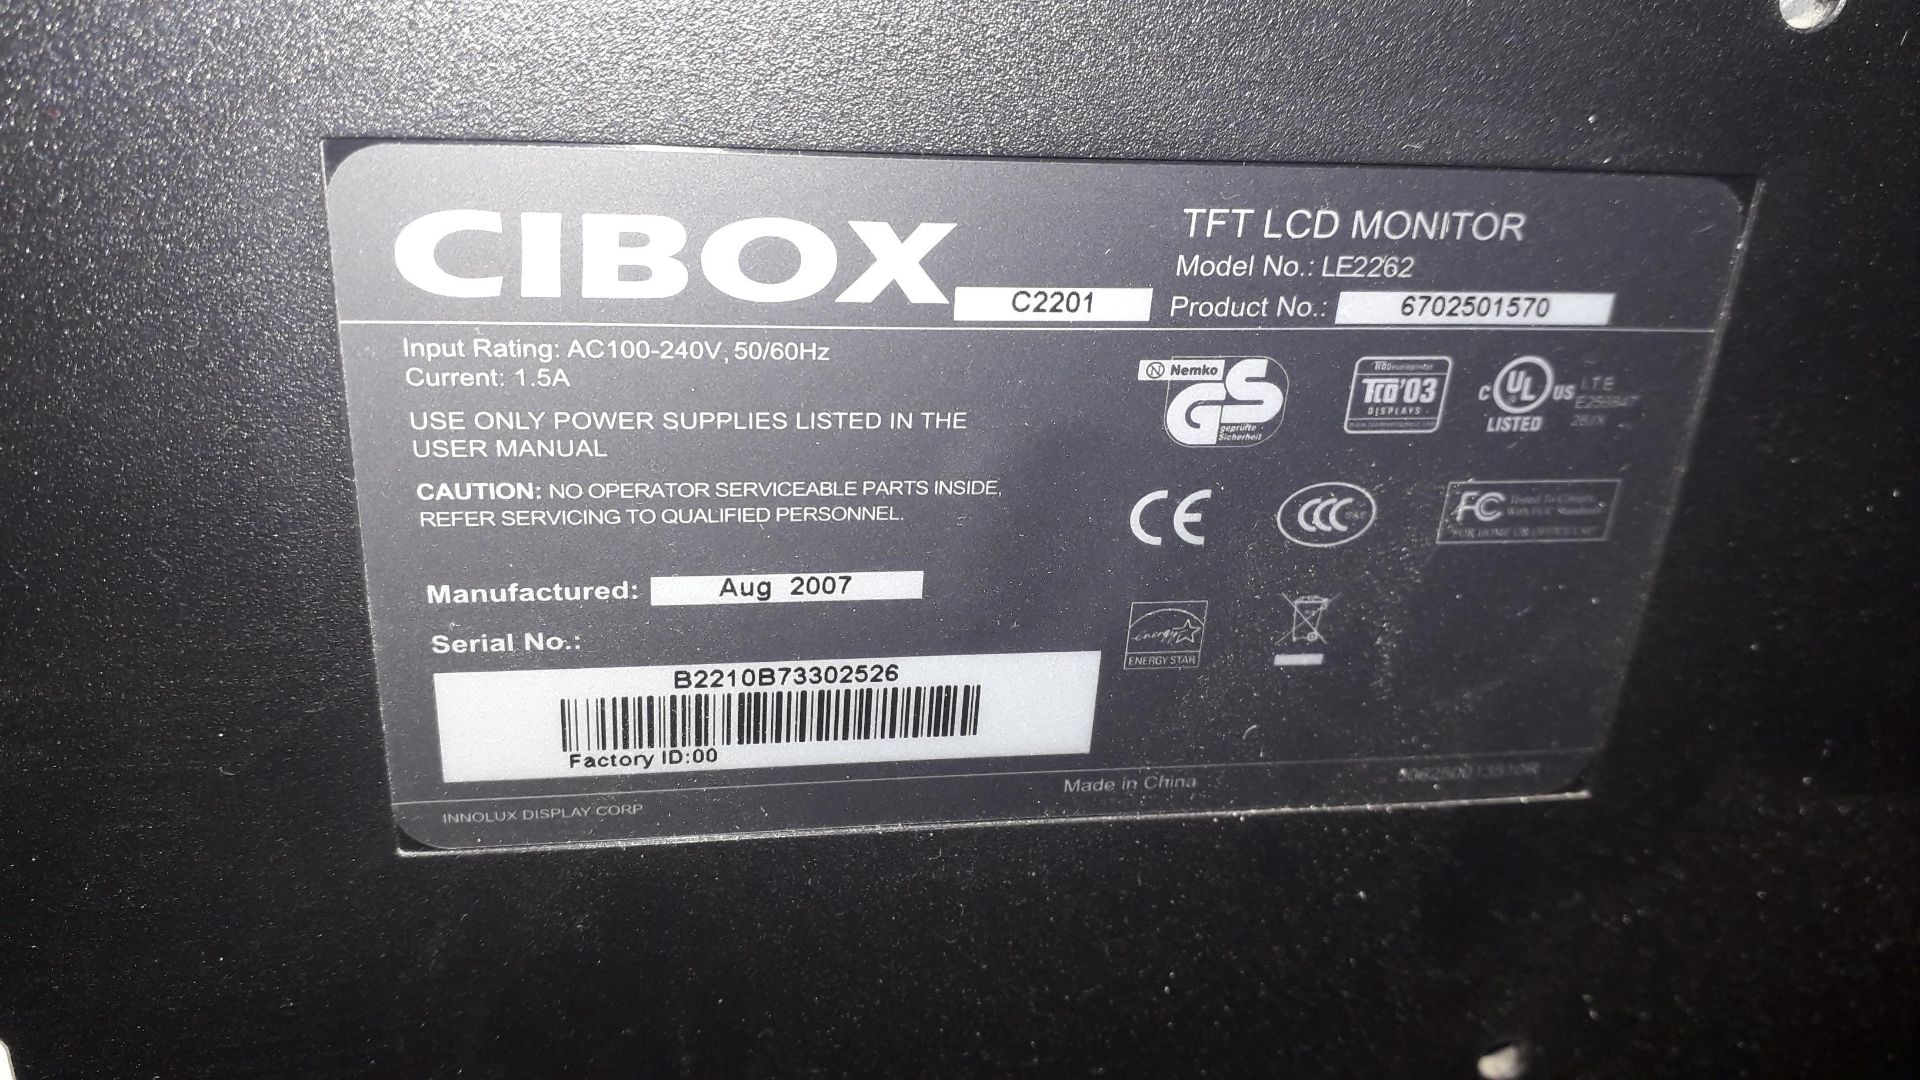 CIBOX LE2262 22" LCD Monitors (2007) - Located on 1st Floor - Image 2 of 3